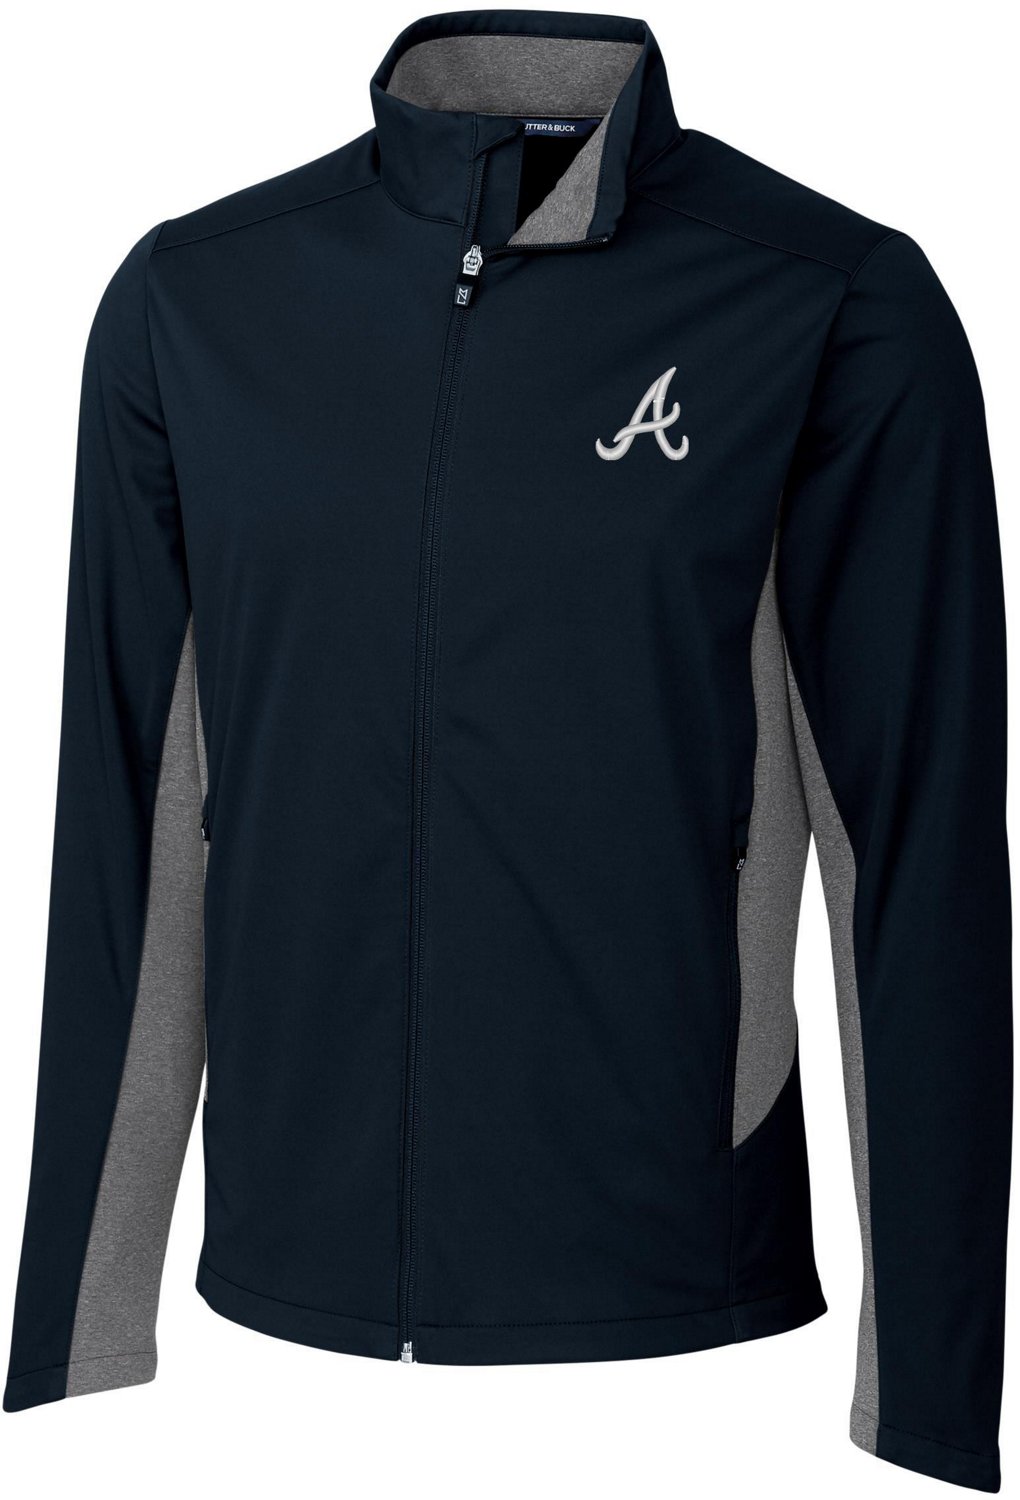 Cutter & Buck Men's Atlanta Braves Big Navigate Softshell Jacket Tour Blue, 2x - MLB Outerwear Adult/Youth at Academy Sports